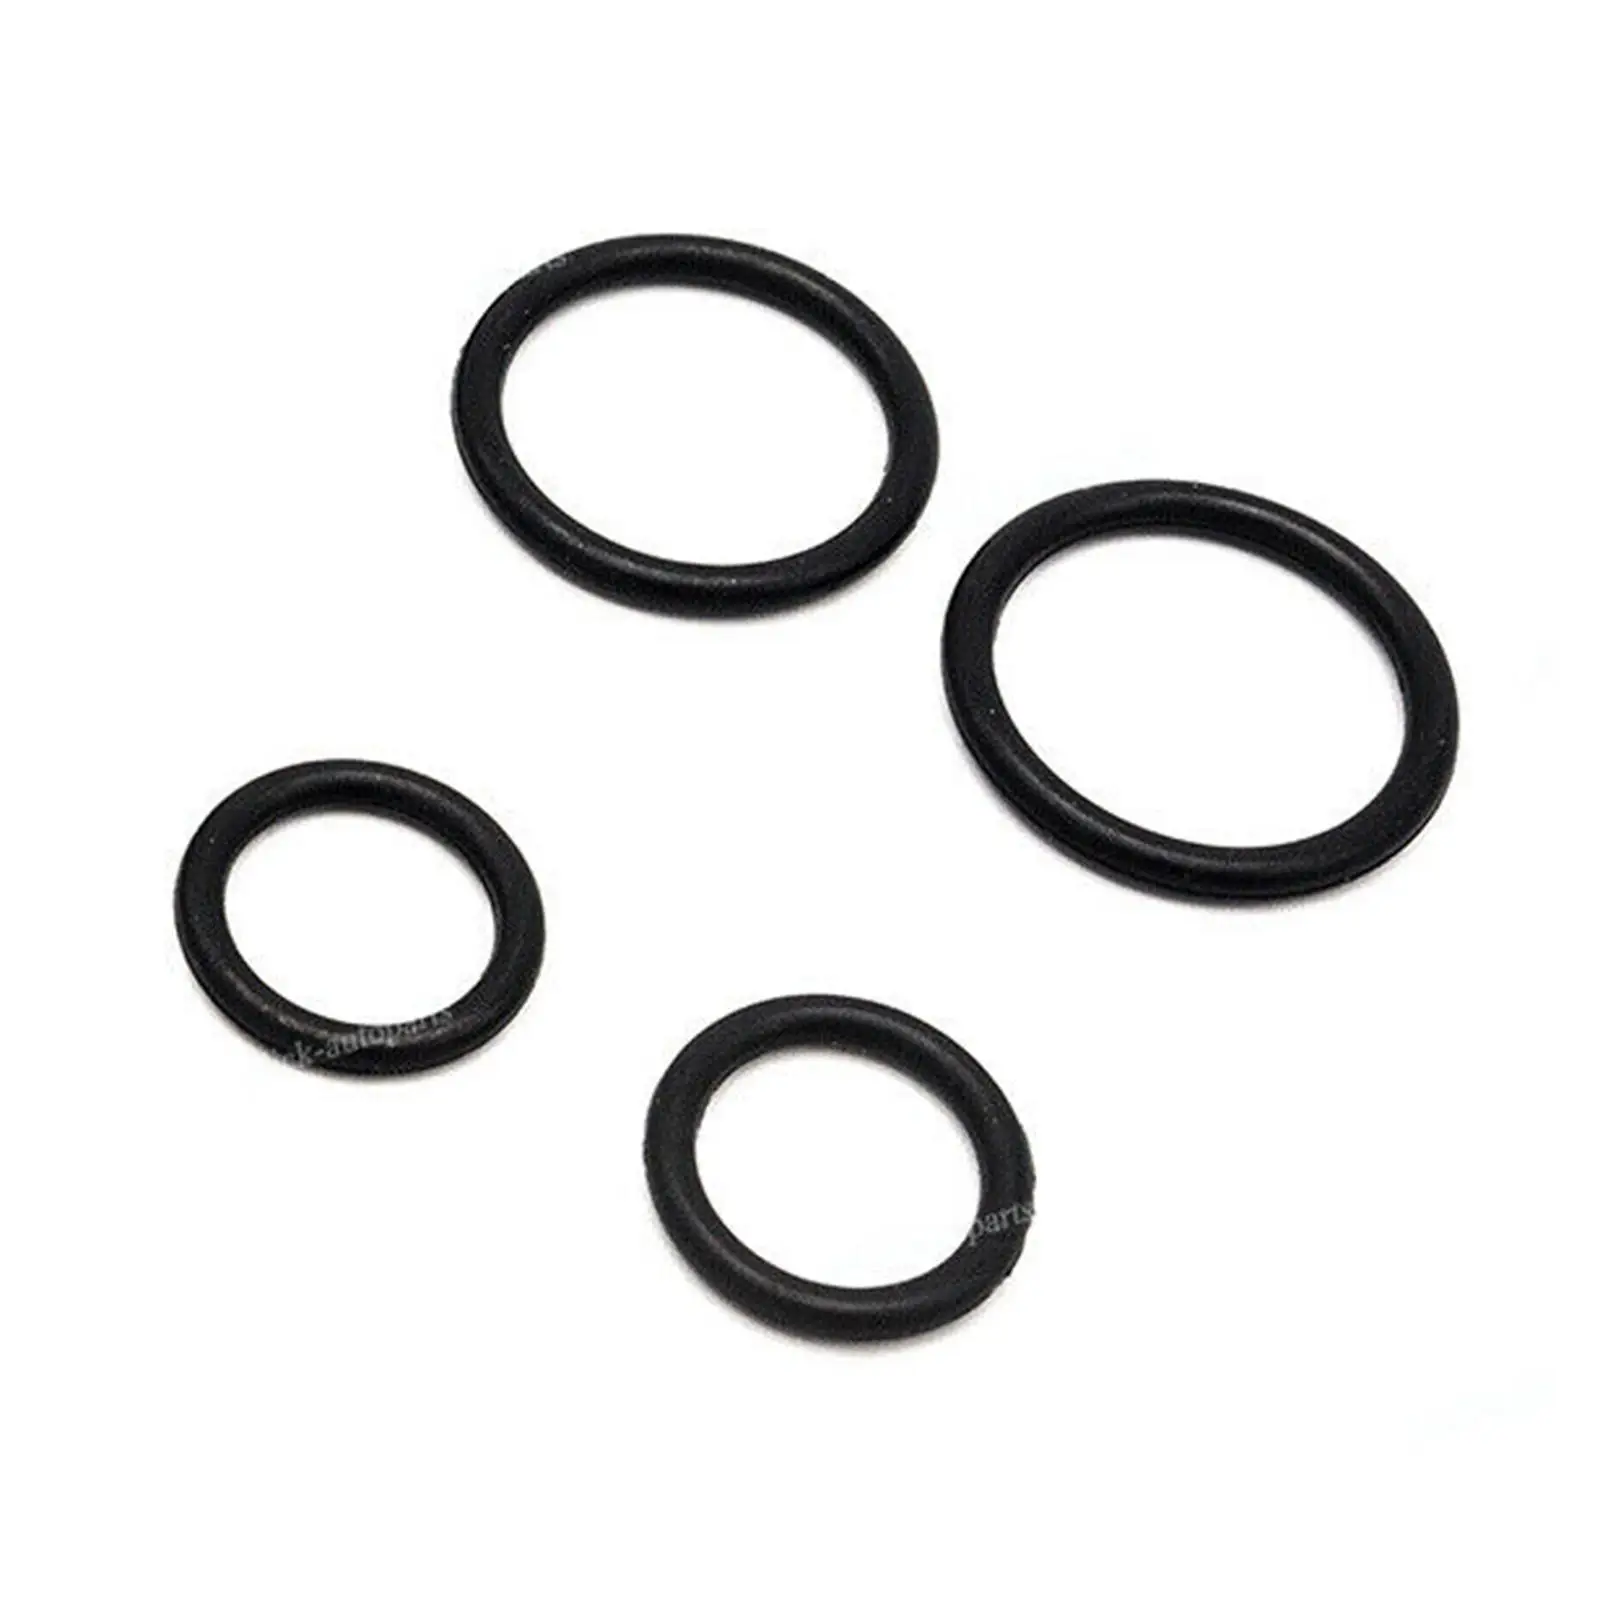 Engine Oil Cooler Gasket Seals 55354071 Fit for Chevy Aveo Aveo5 Cruze